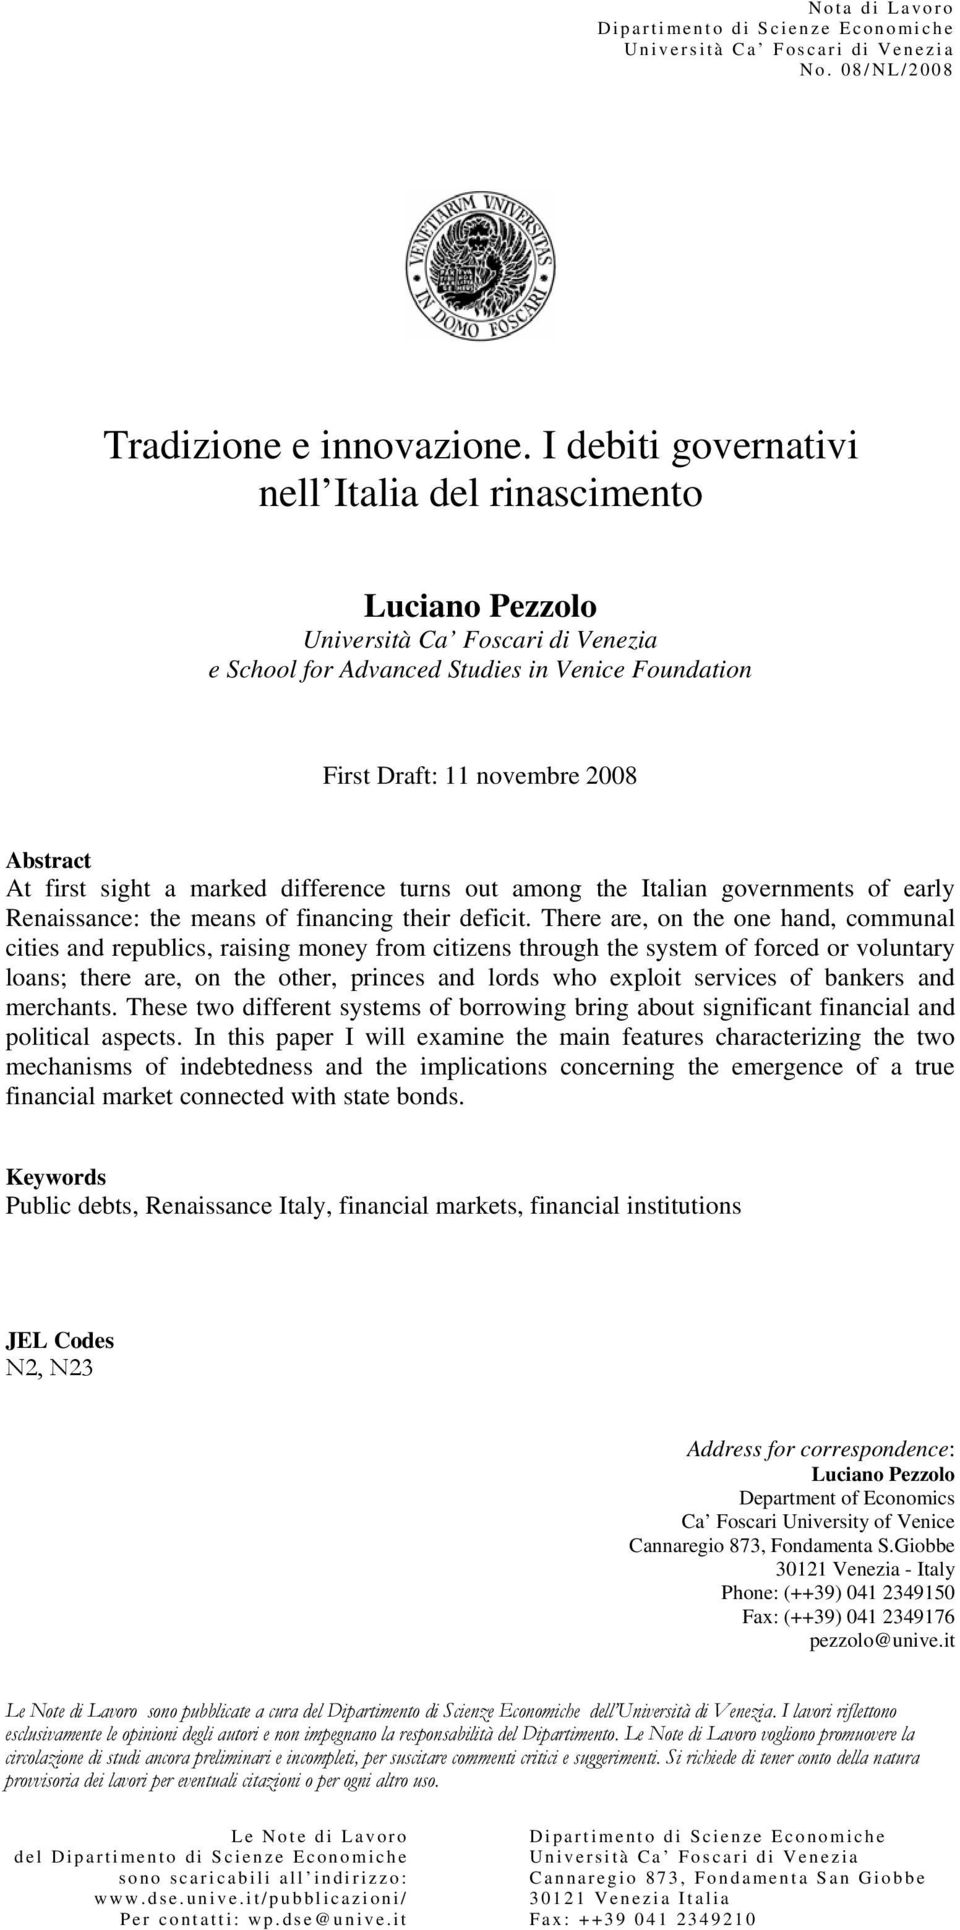 sight a marked difference turns out among the Italian governments of early Renaissance: the means of financing their deficit.